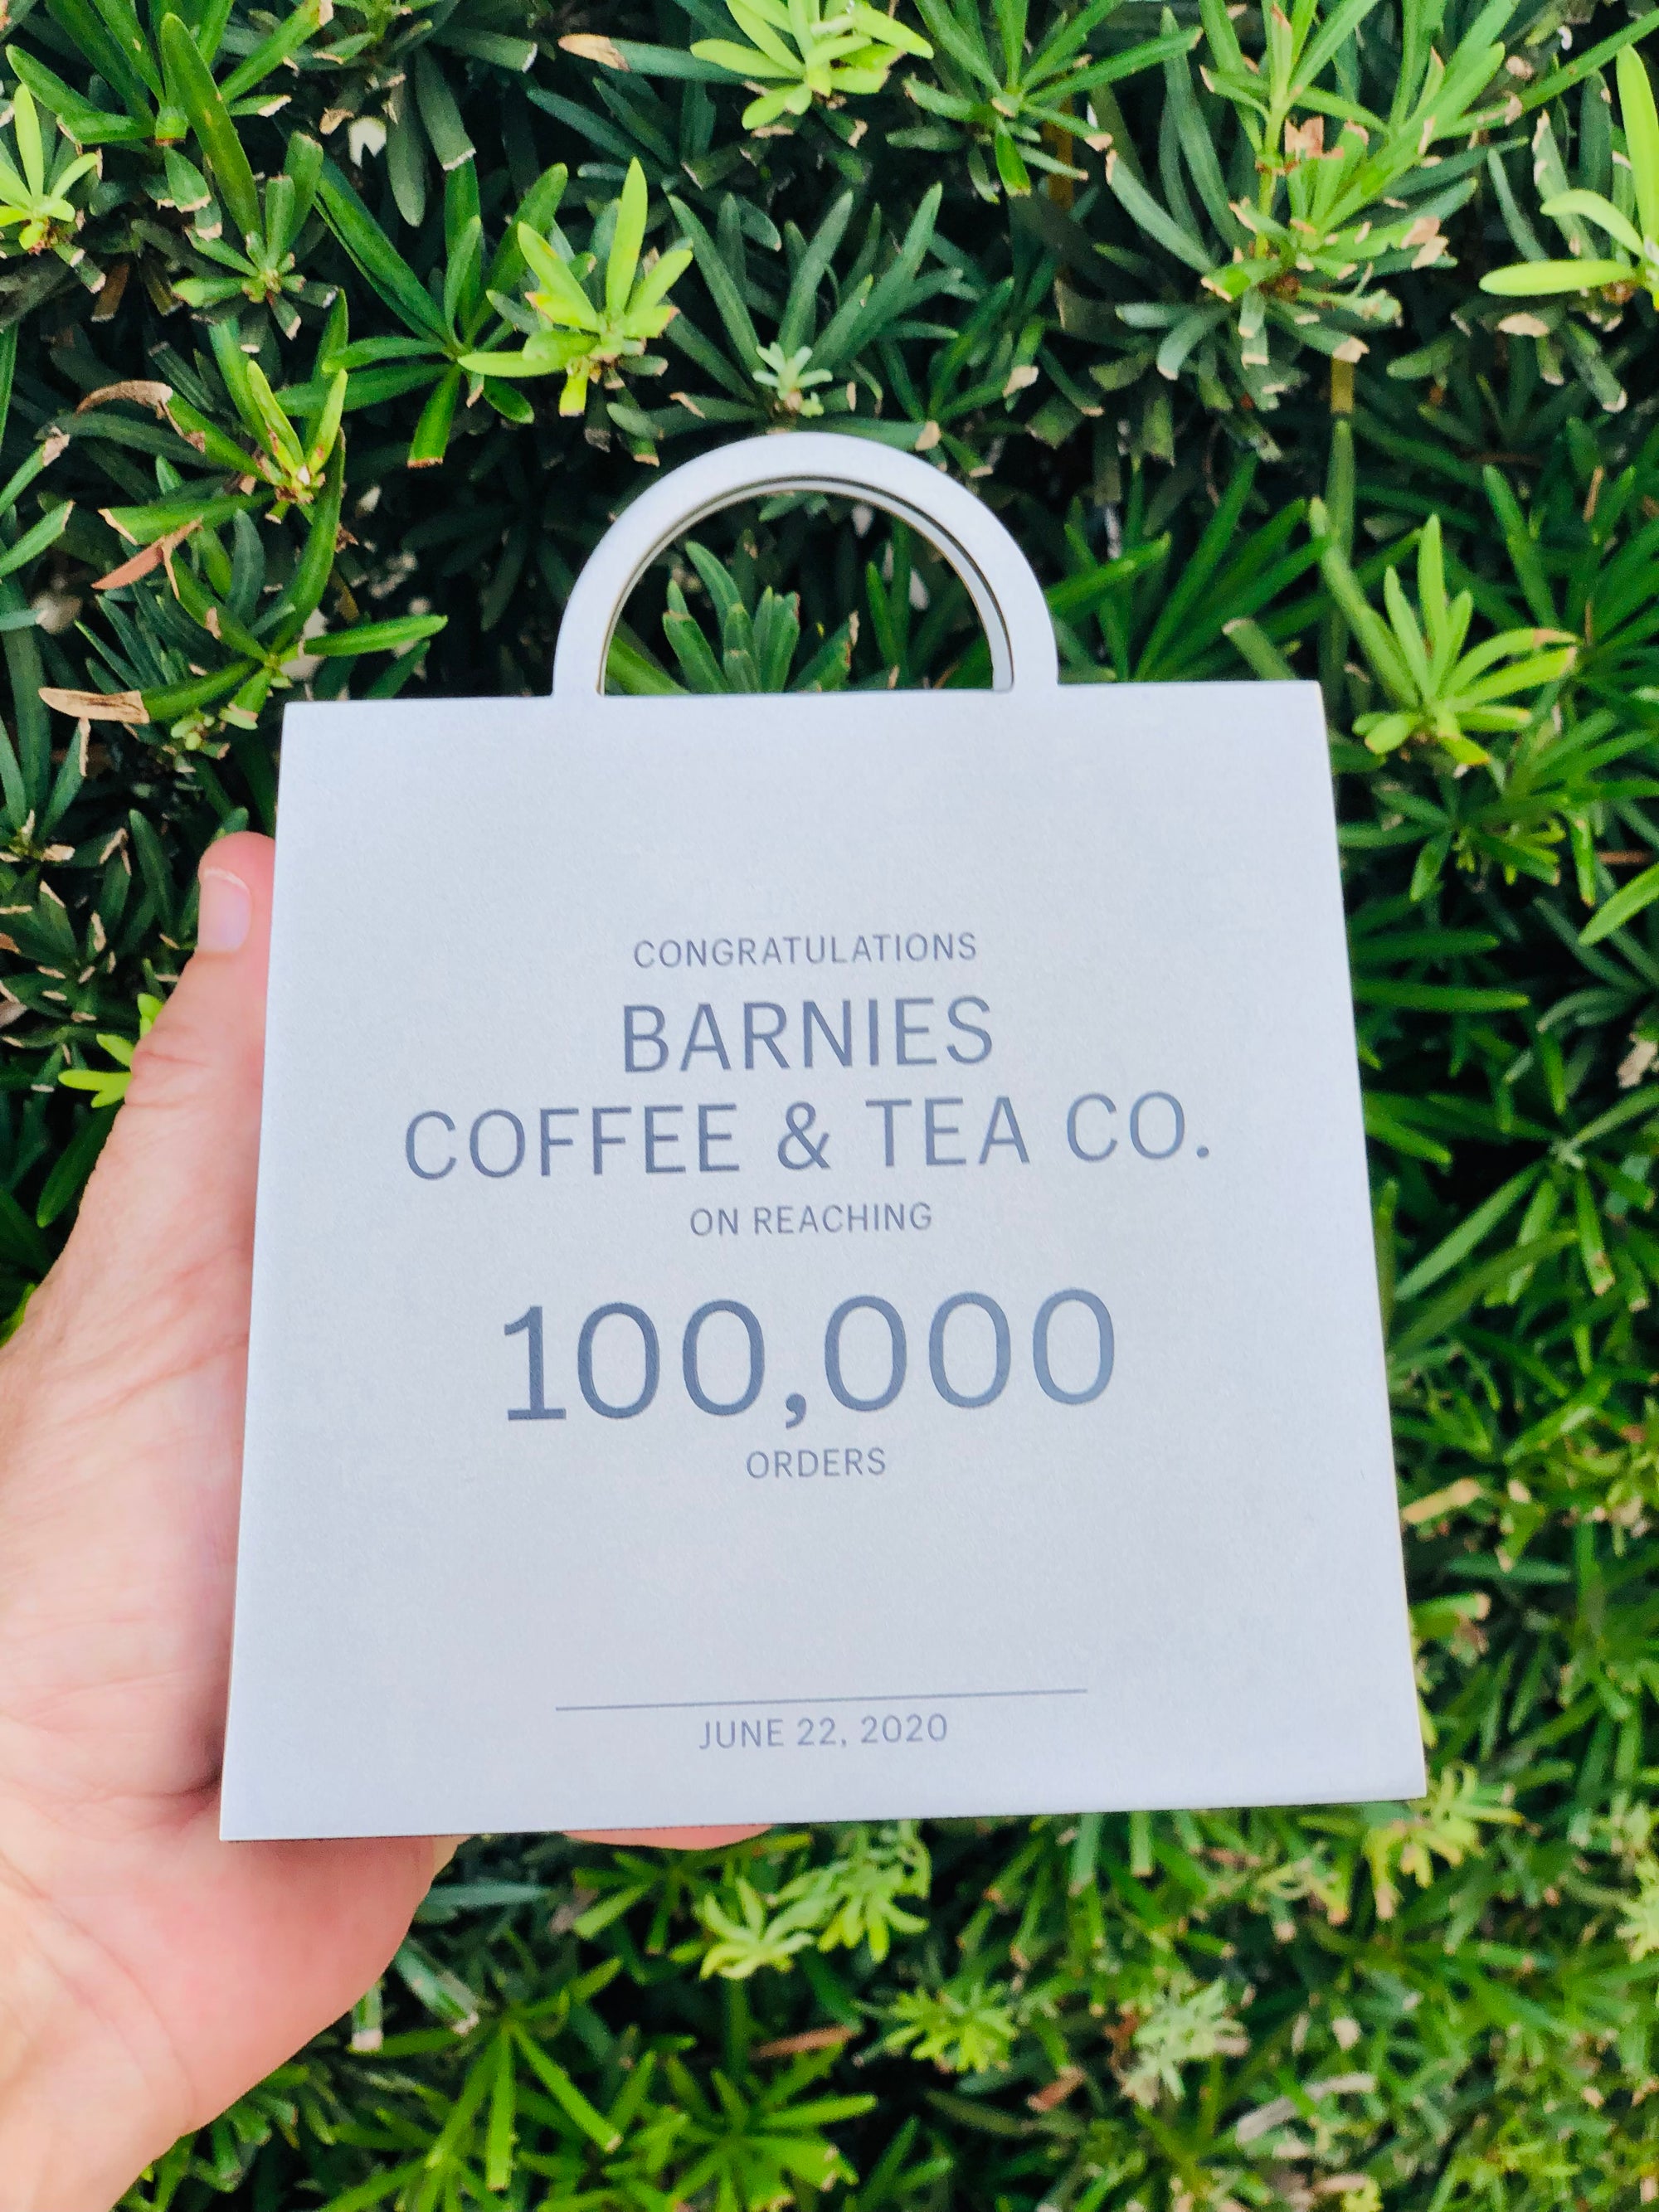 Barnie's Coffee Company Online Store Wins Top Performer Award